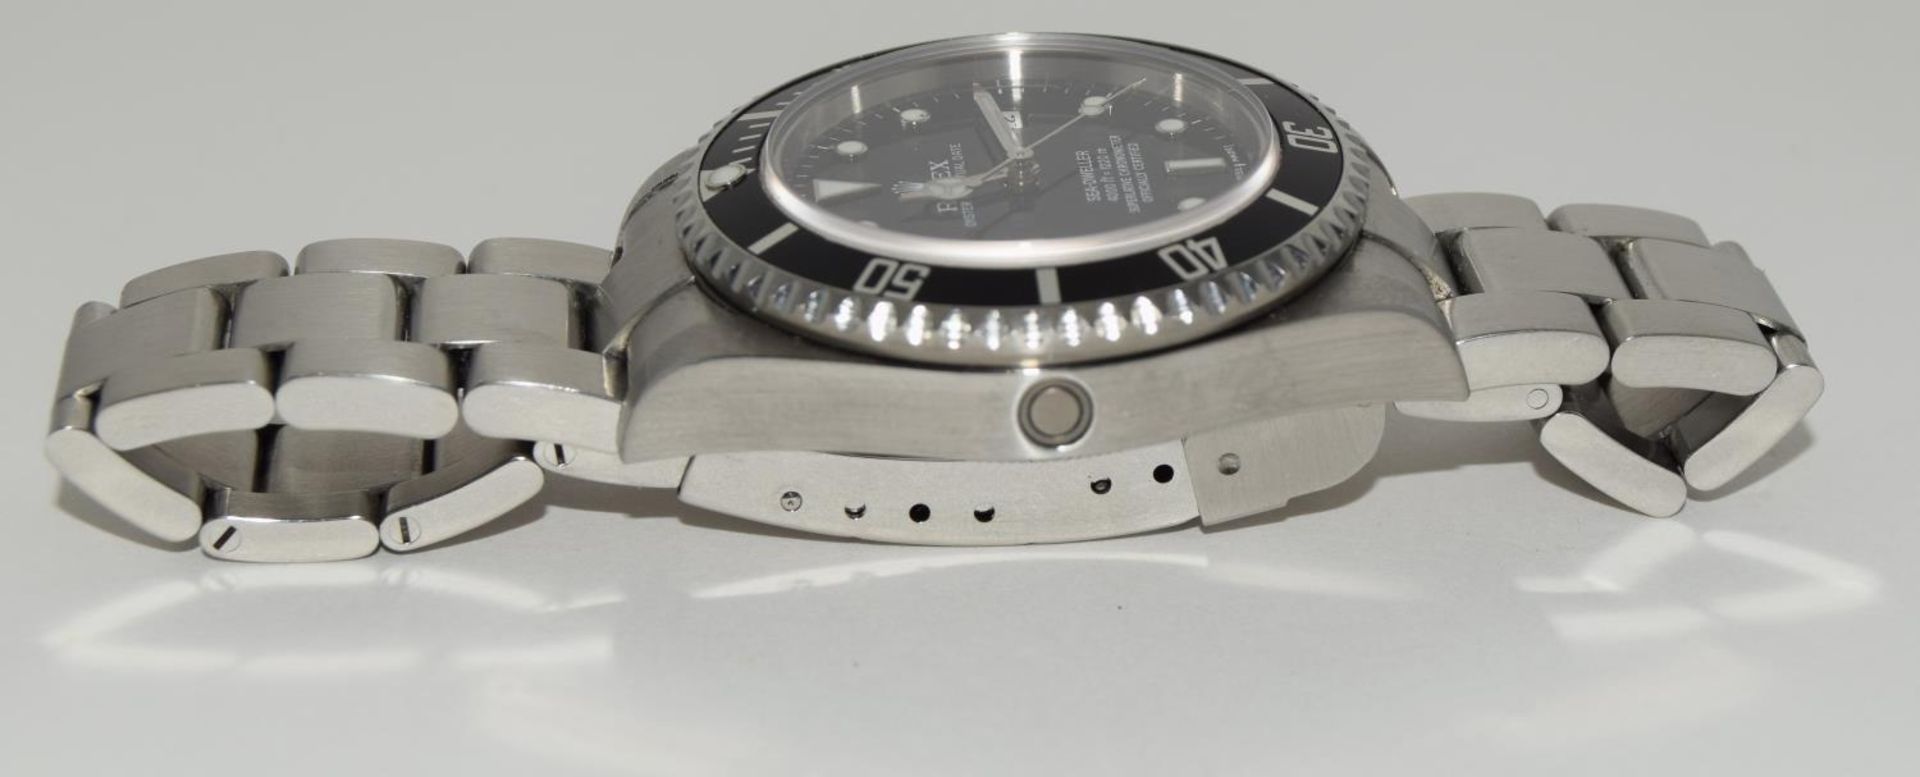 Rolex Sea Dweller mopd-16600, 2006, boxed and papers. (ref 8) - Image 3 of 7